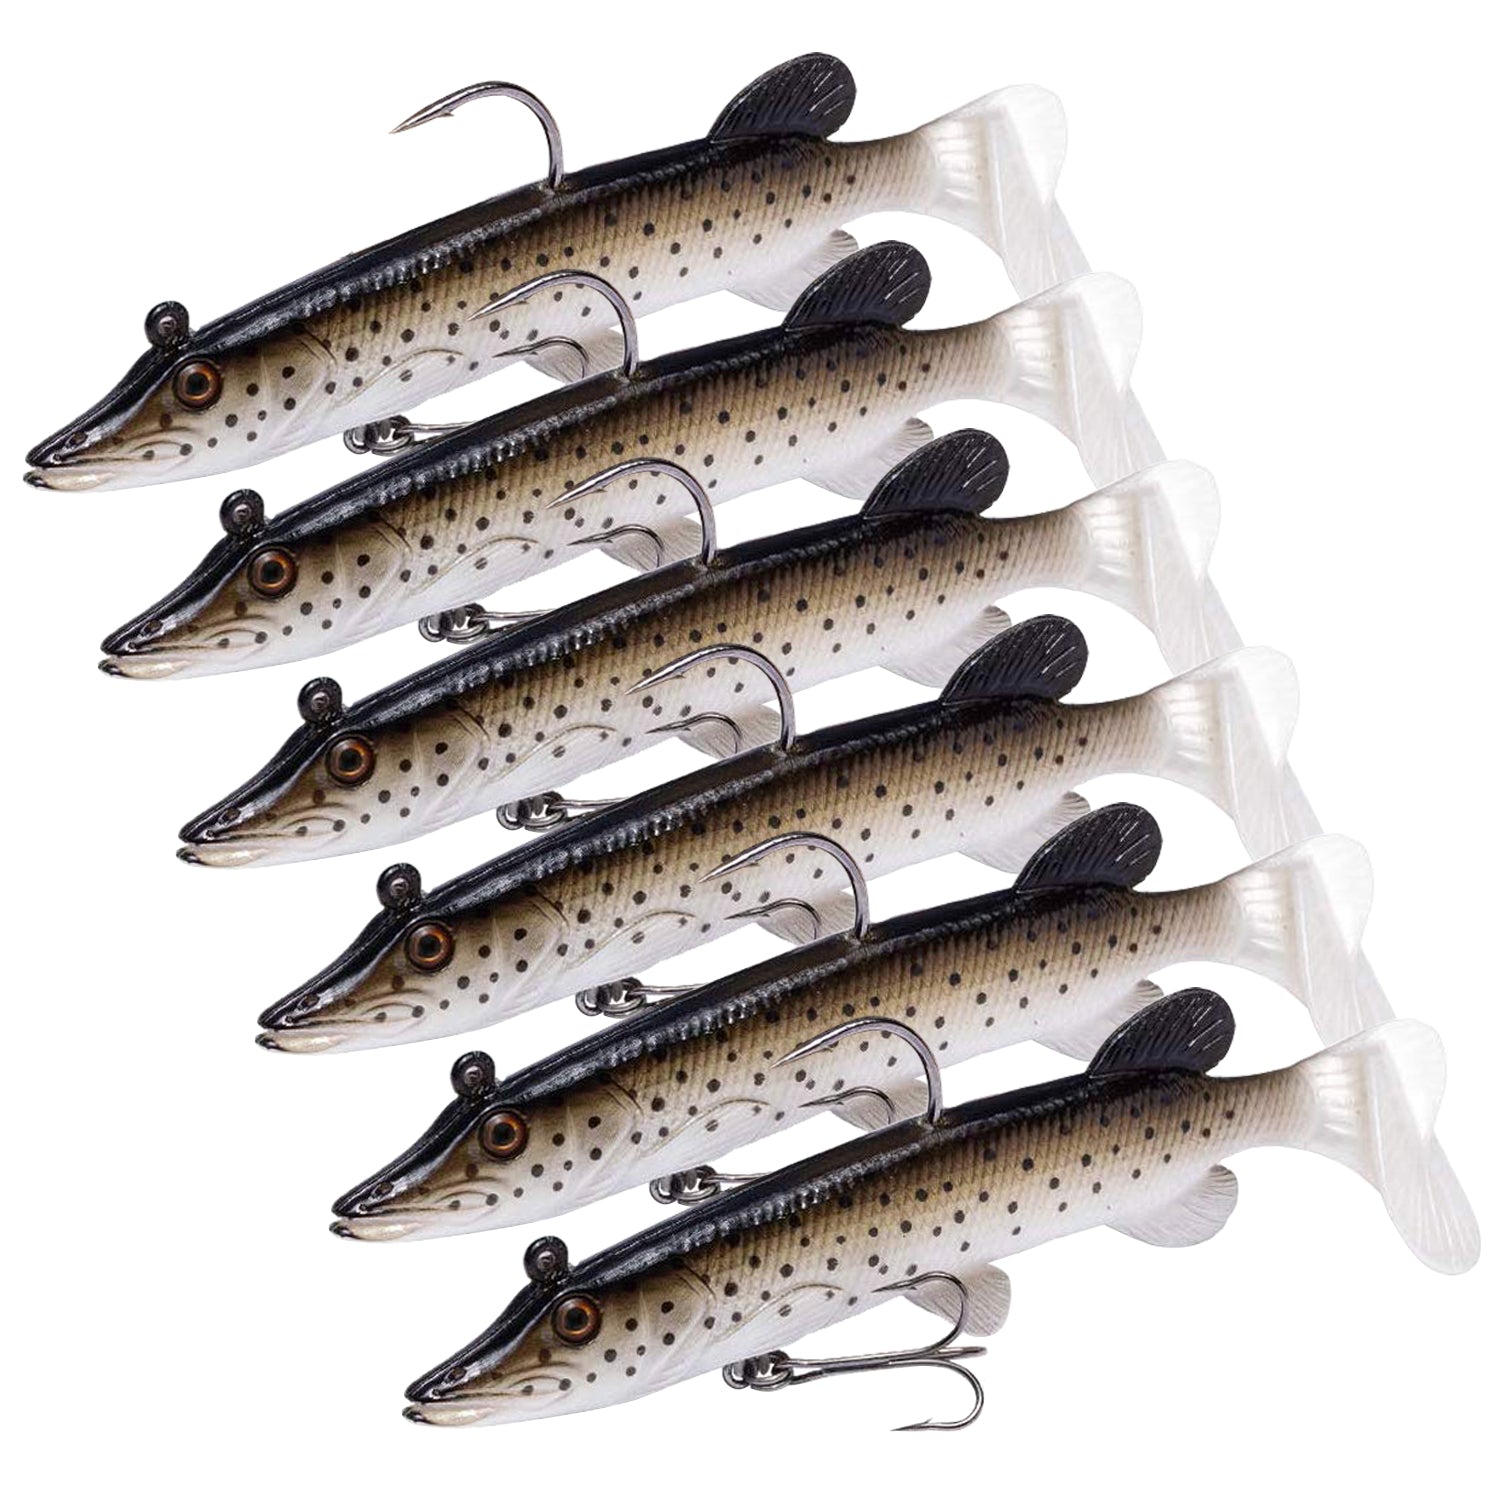 Down South Lures Super Model 5 Paddle Tail Swimbaits 6-Pack (Made